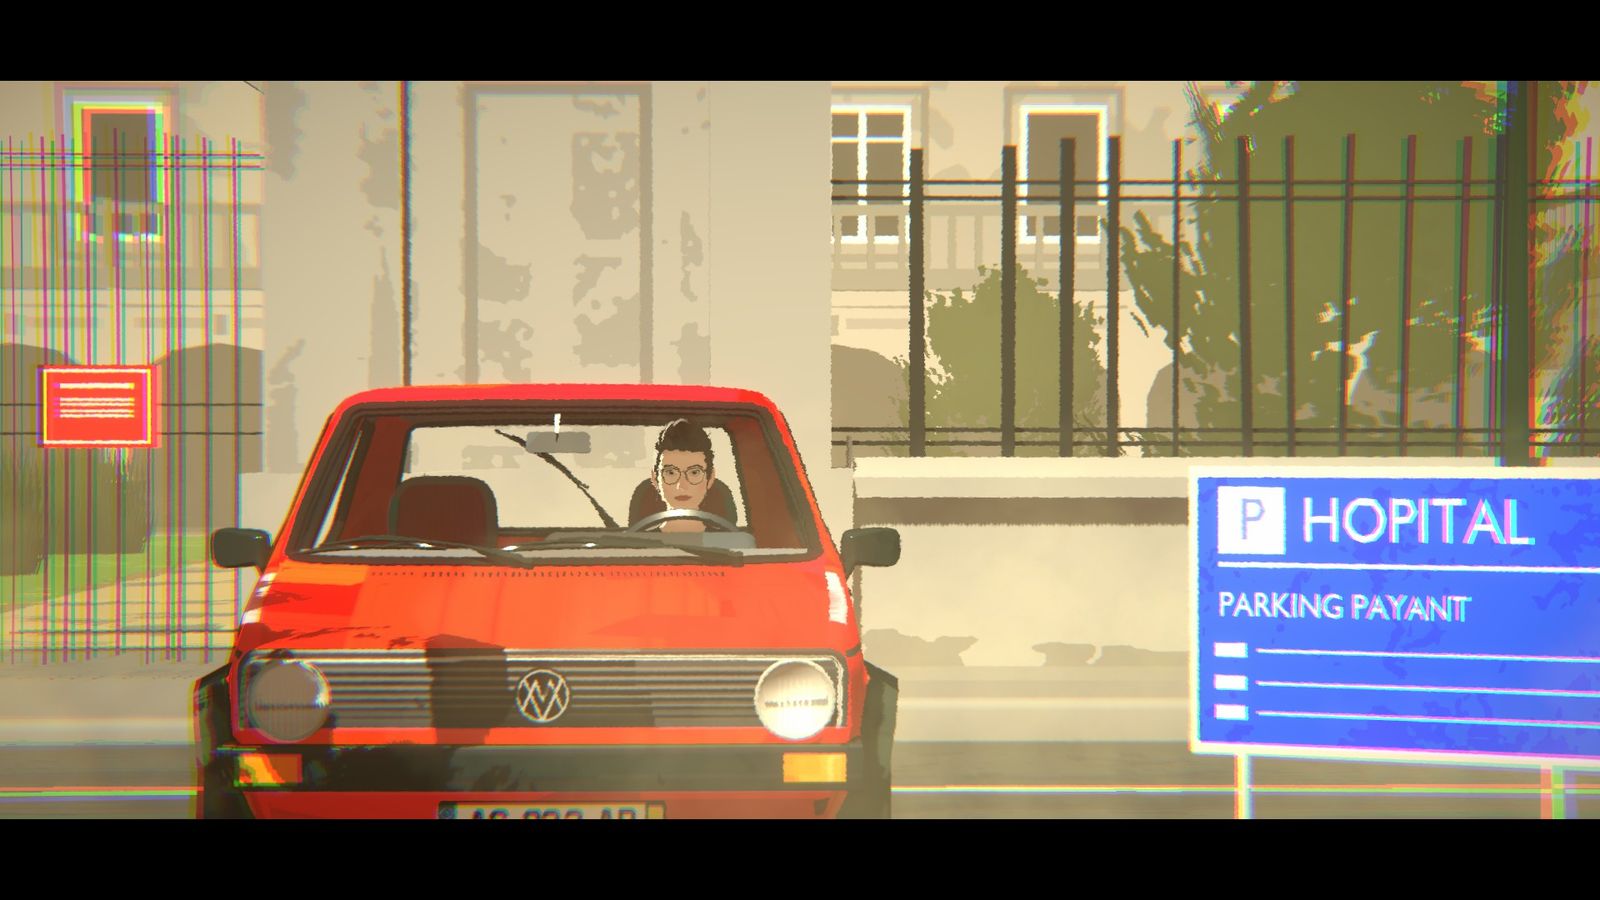 The Wreck's protagonist sits in her car outside the hospital.